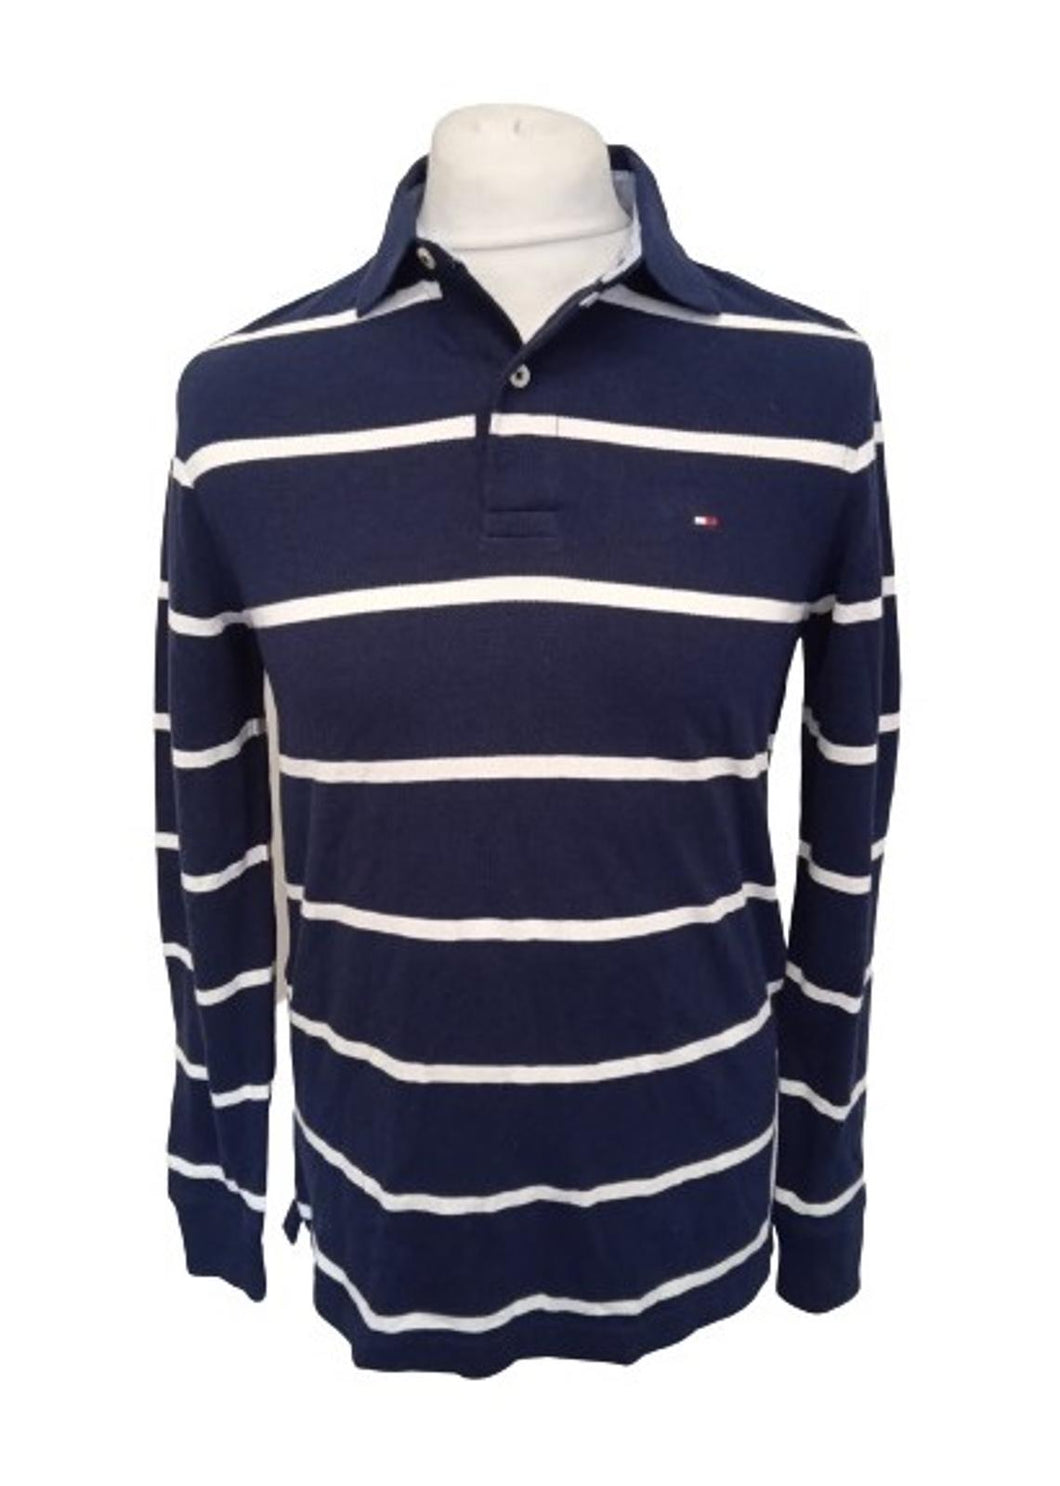 TOMMY HILFIGER Men's Navy Blue & White Striped Long Sleeve T-Shirt XS NEW